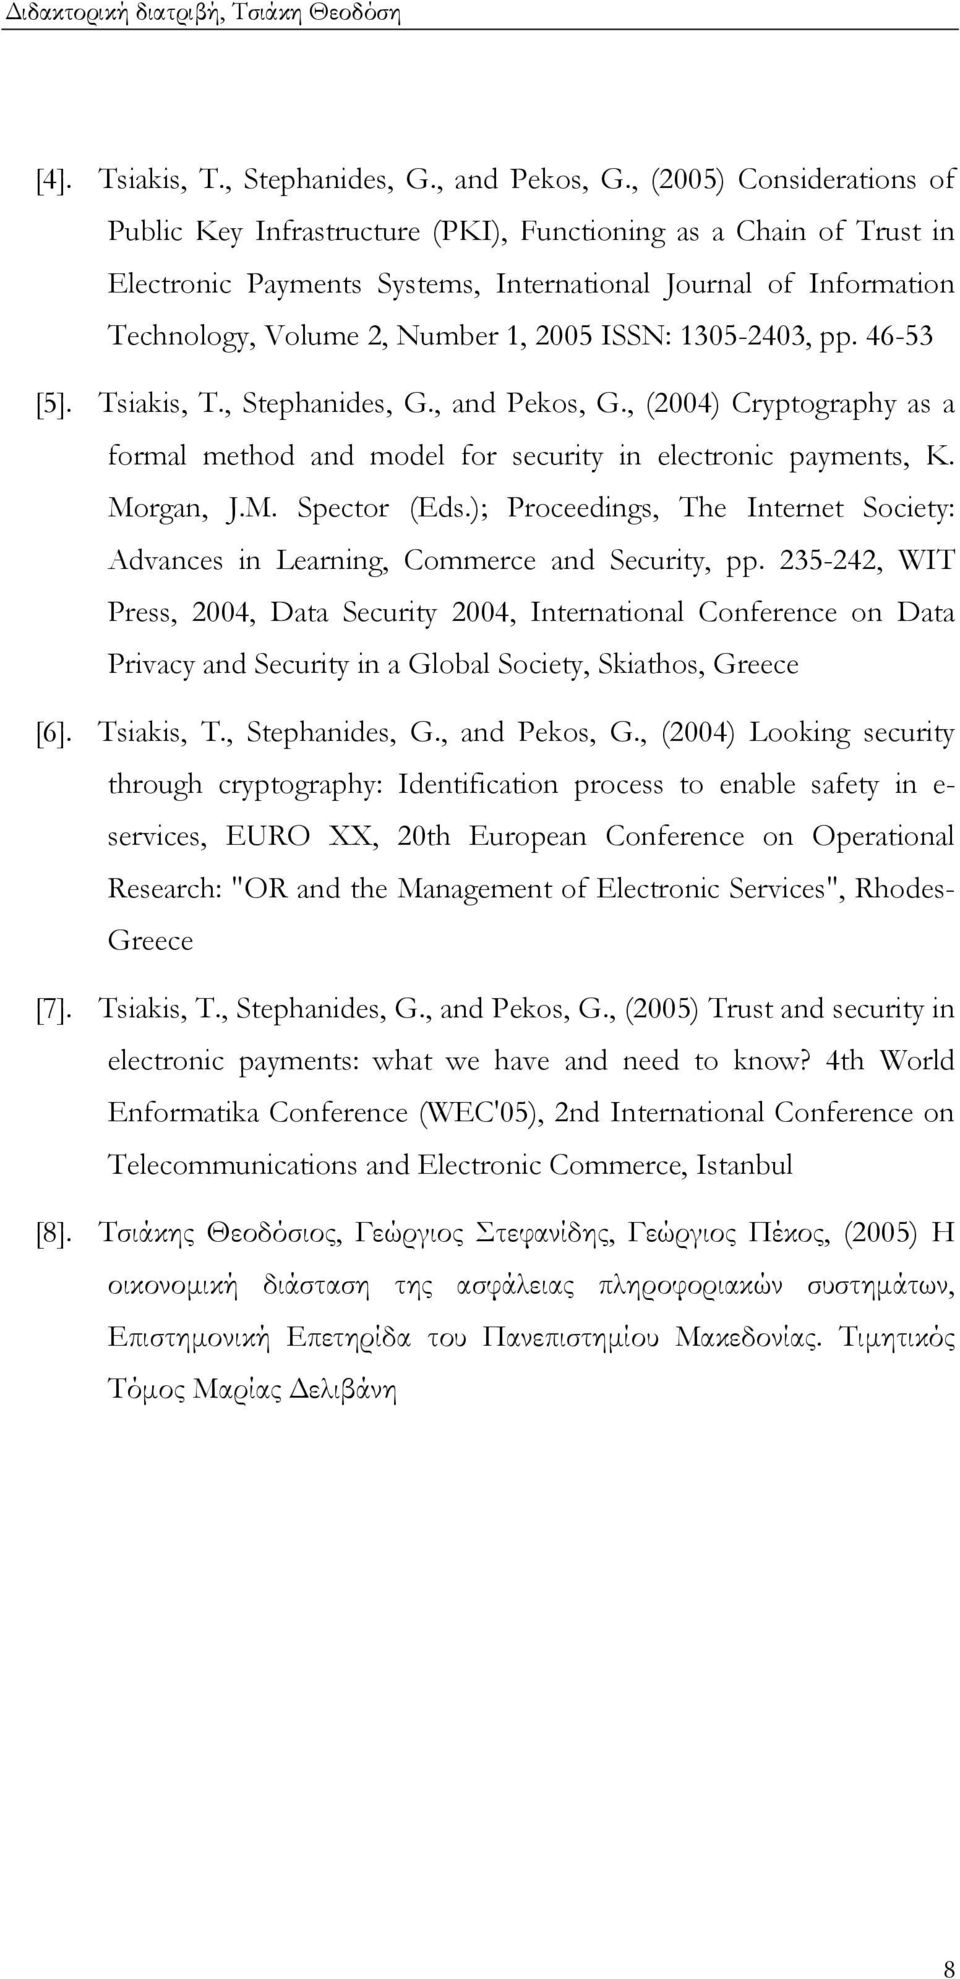 ISSN: 1305-2403, pp. 46-53 [5]. Tsiakis, T., Stephanides, G., and Pekos, G., (2004) Cryptography as a formal method and model for security in electronic payments, K. Morgan, J.M. Spector (Eds.